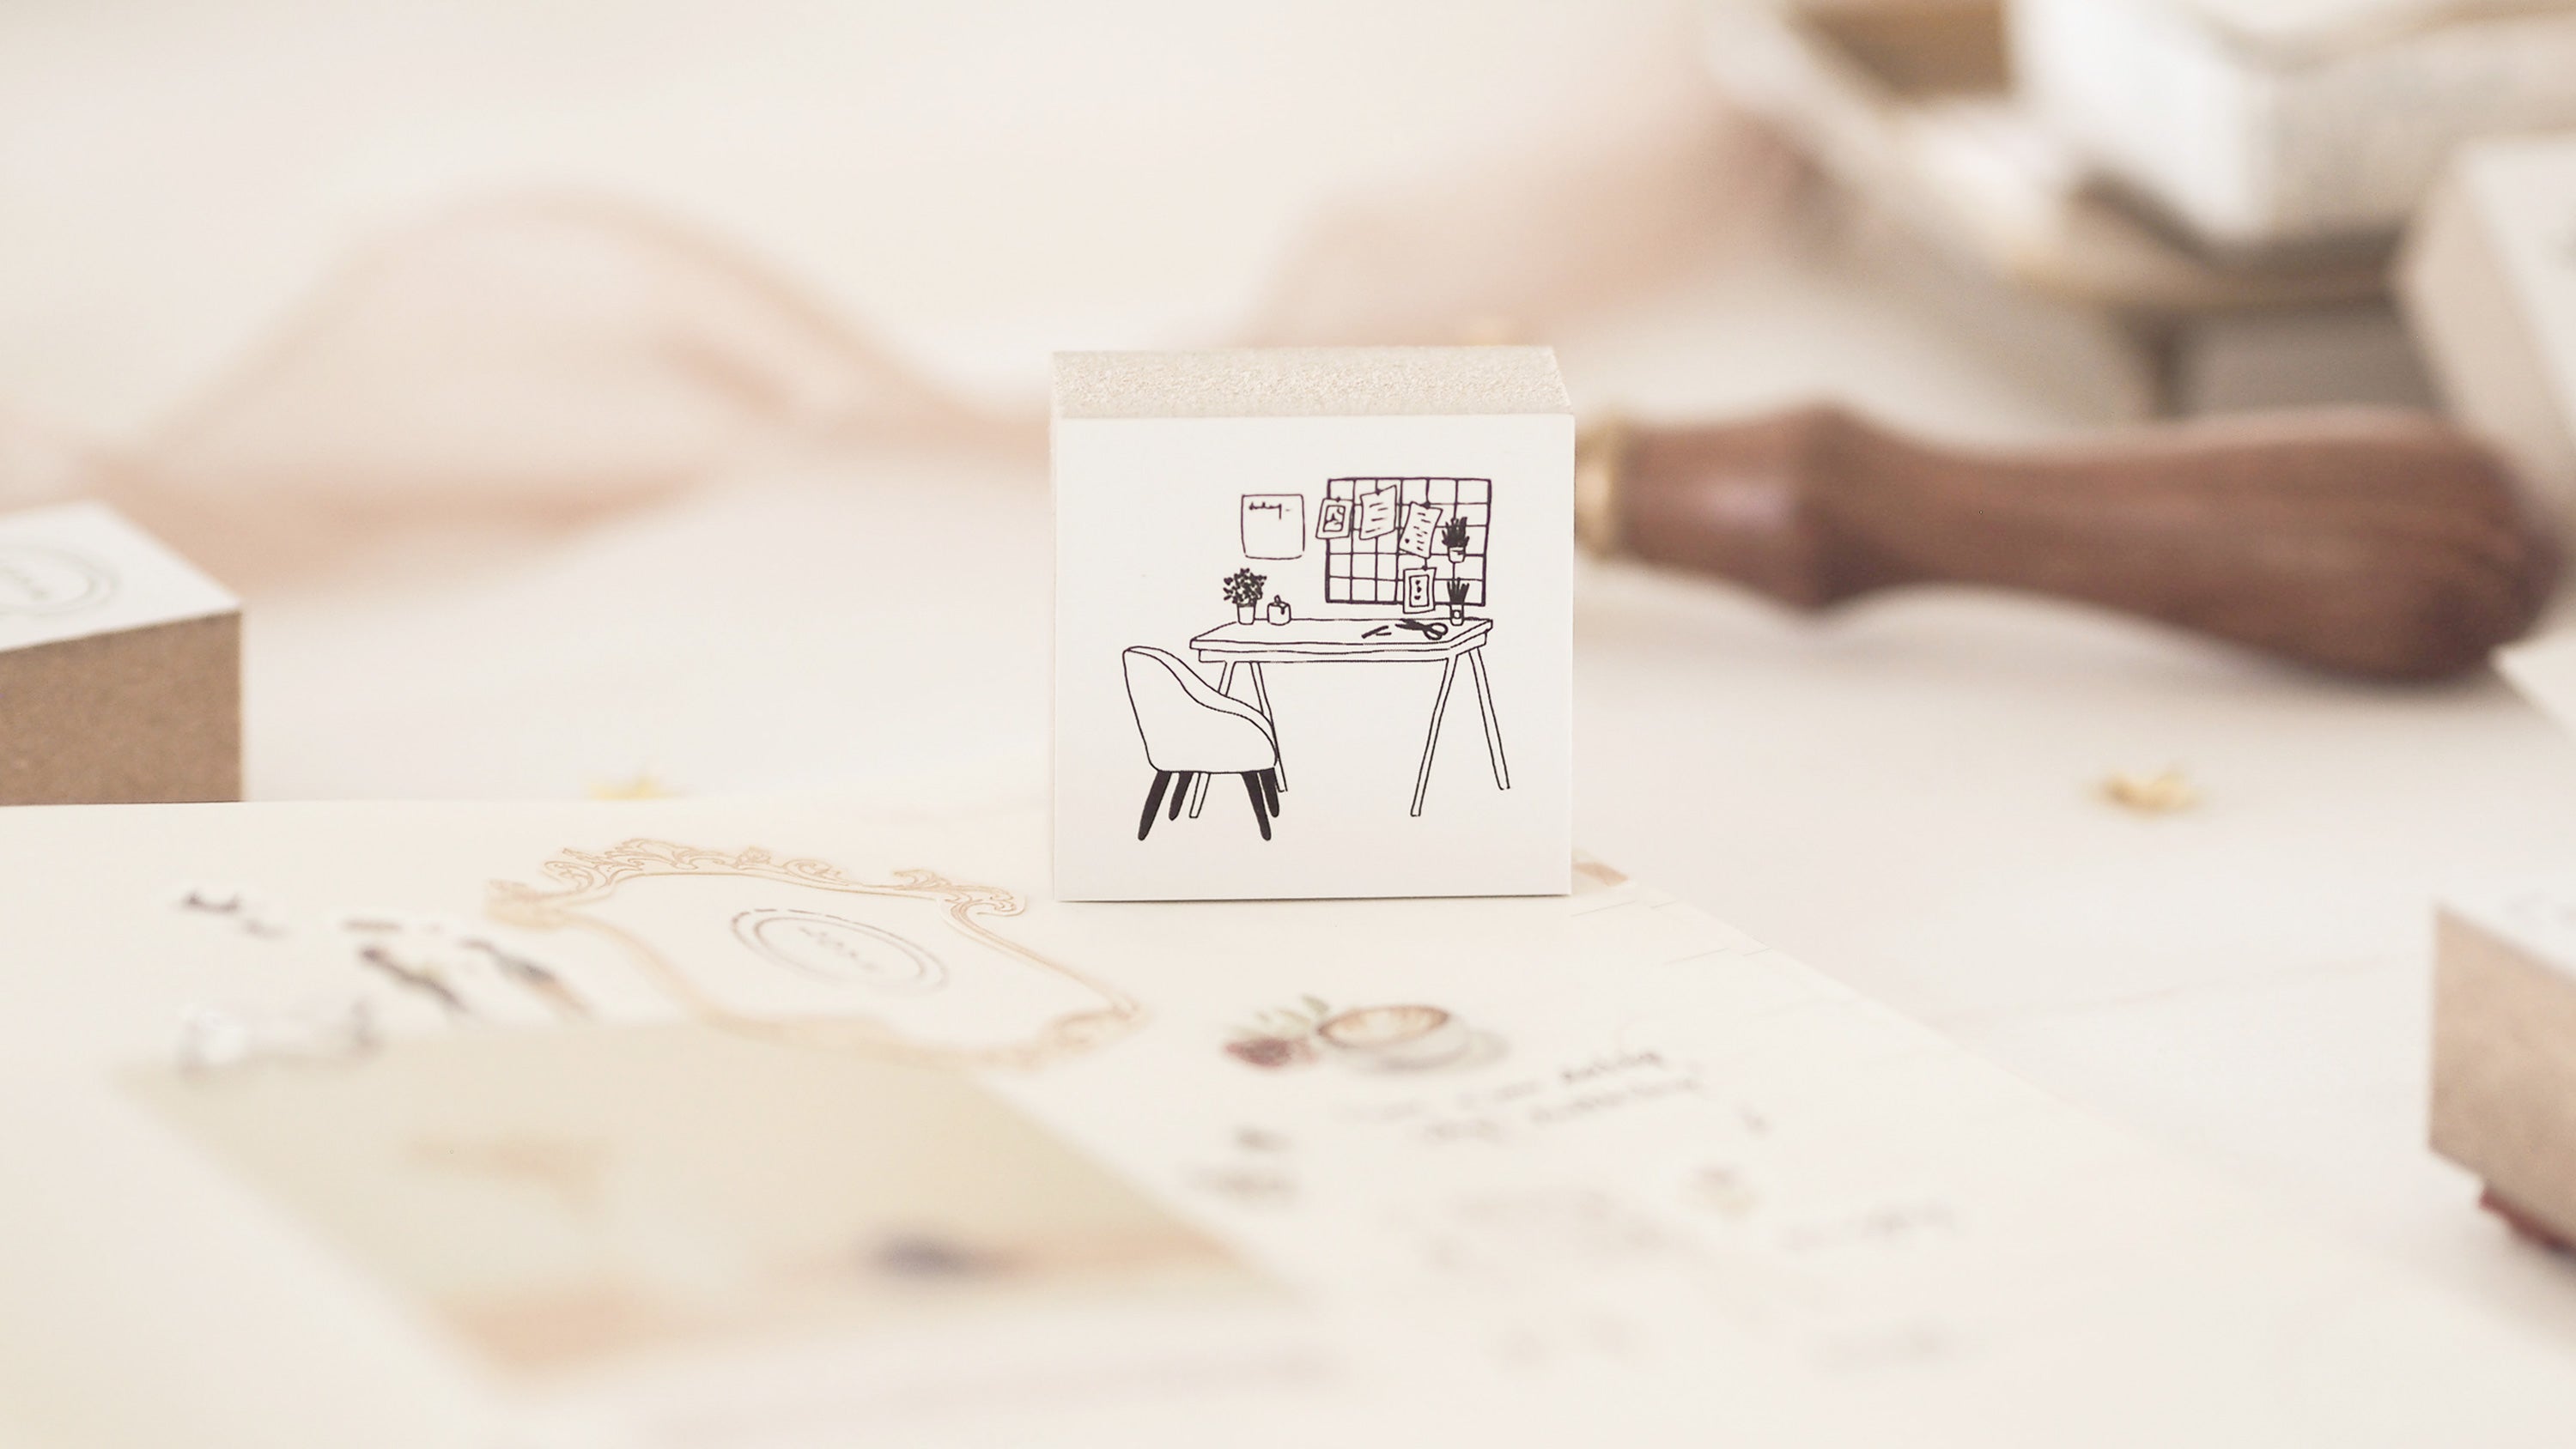 Blinks of Life - Rubber Stamps, Stationery, Journal, Crafts